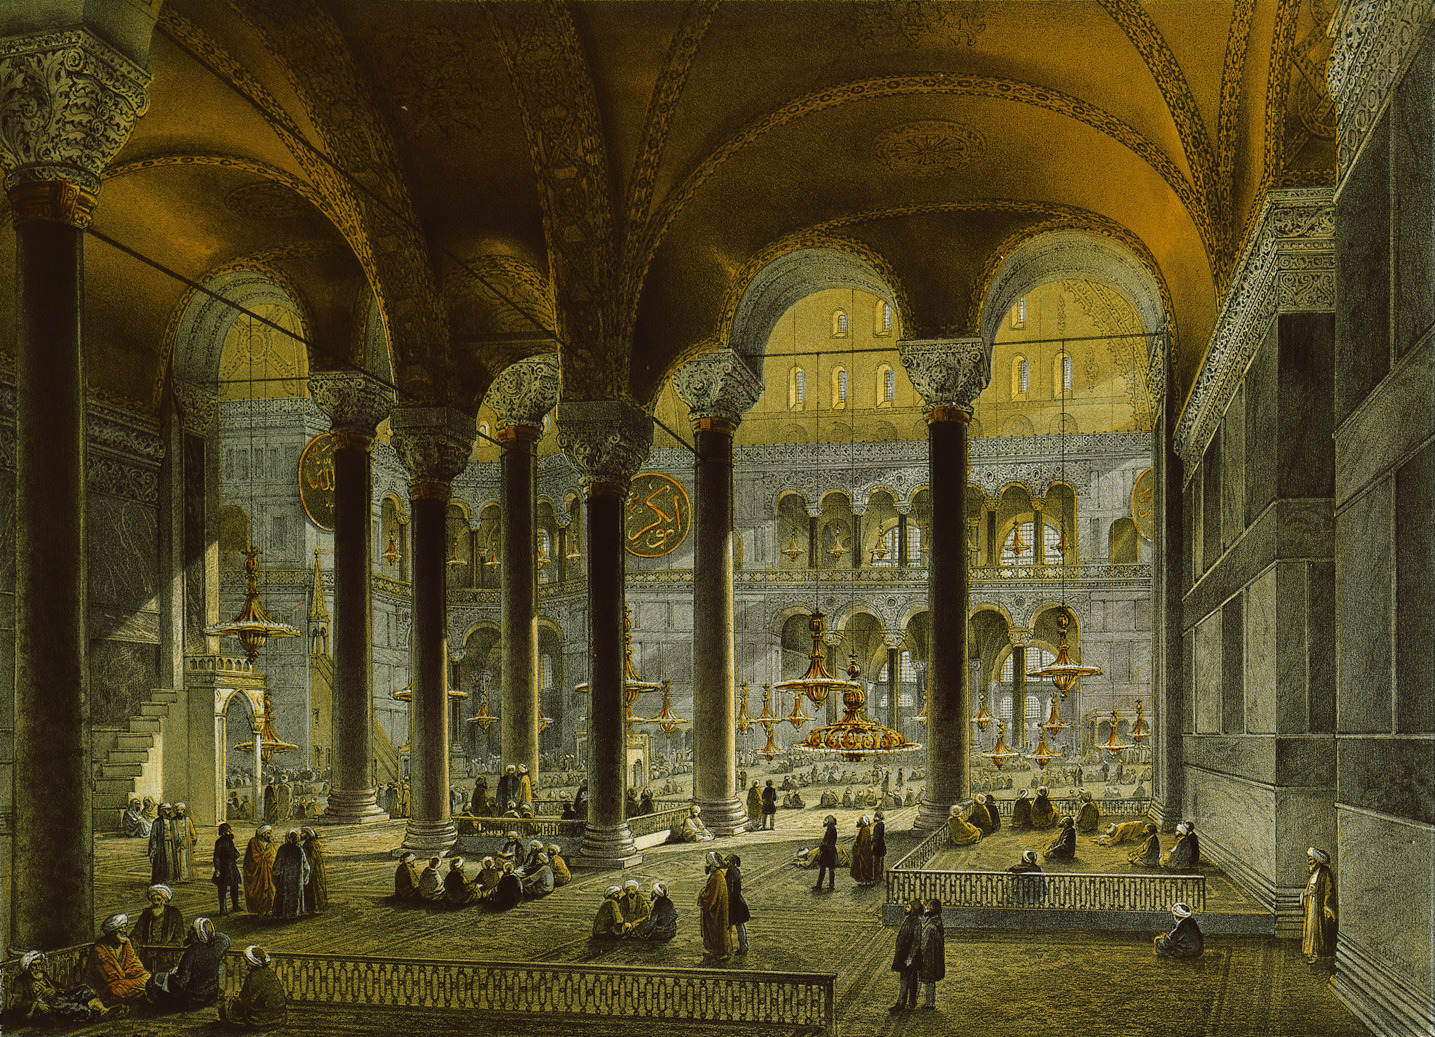 An illustration of the interior of the Hagia Sophia, with soaring arches and mosaics in gold